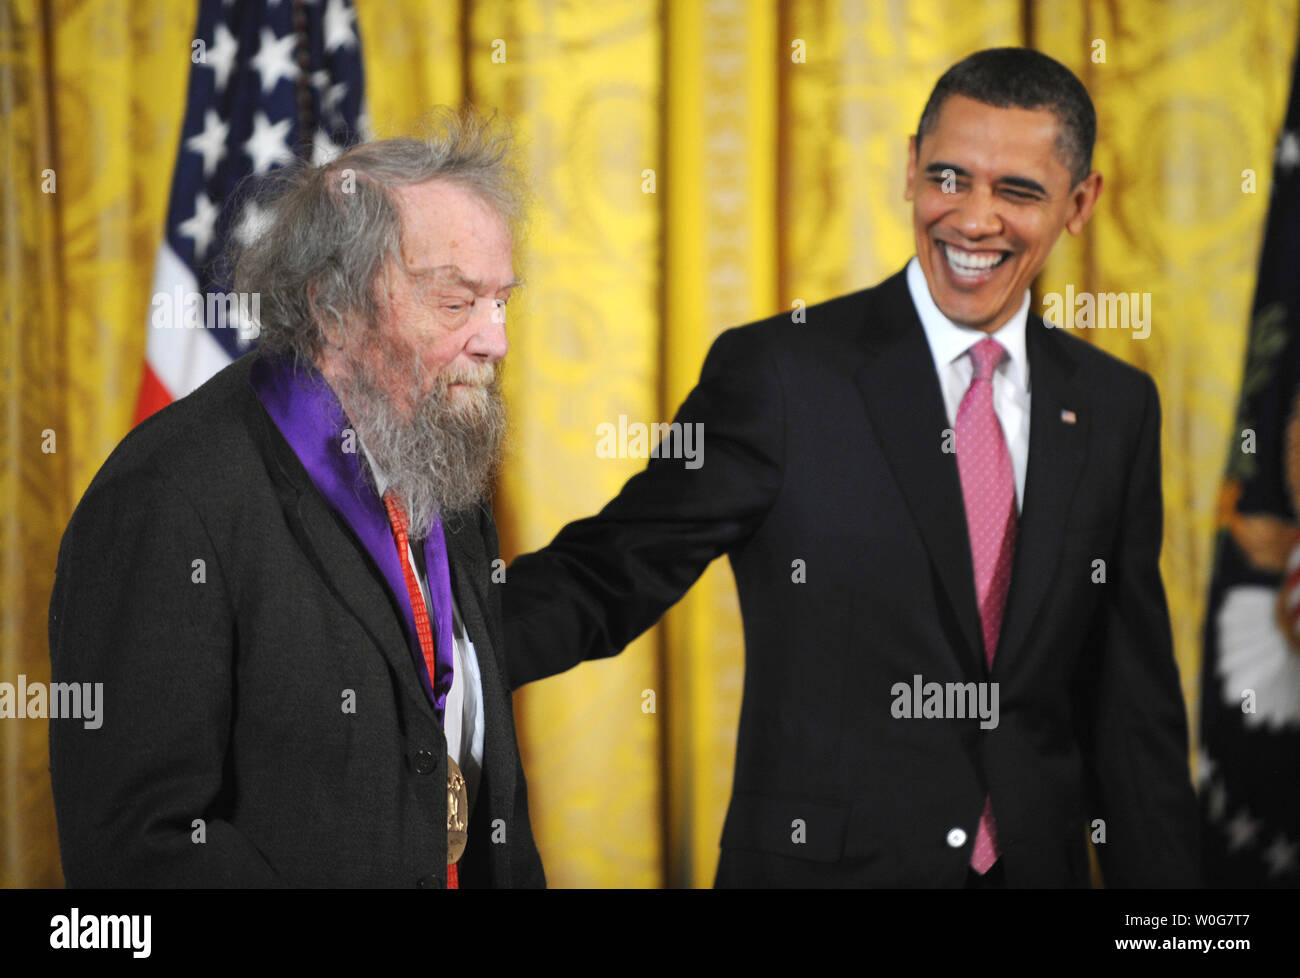 United States President Barack Obama presents the 2010 National Medal of  Arts Medal to poet Donald Hall in the East Room of the White House in Washington, DC on March 2, 2011.  The annual awards are managed by the National Endowment for the Arts.   UPI/Pat Benic Stock Photo